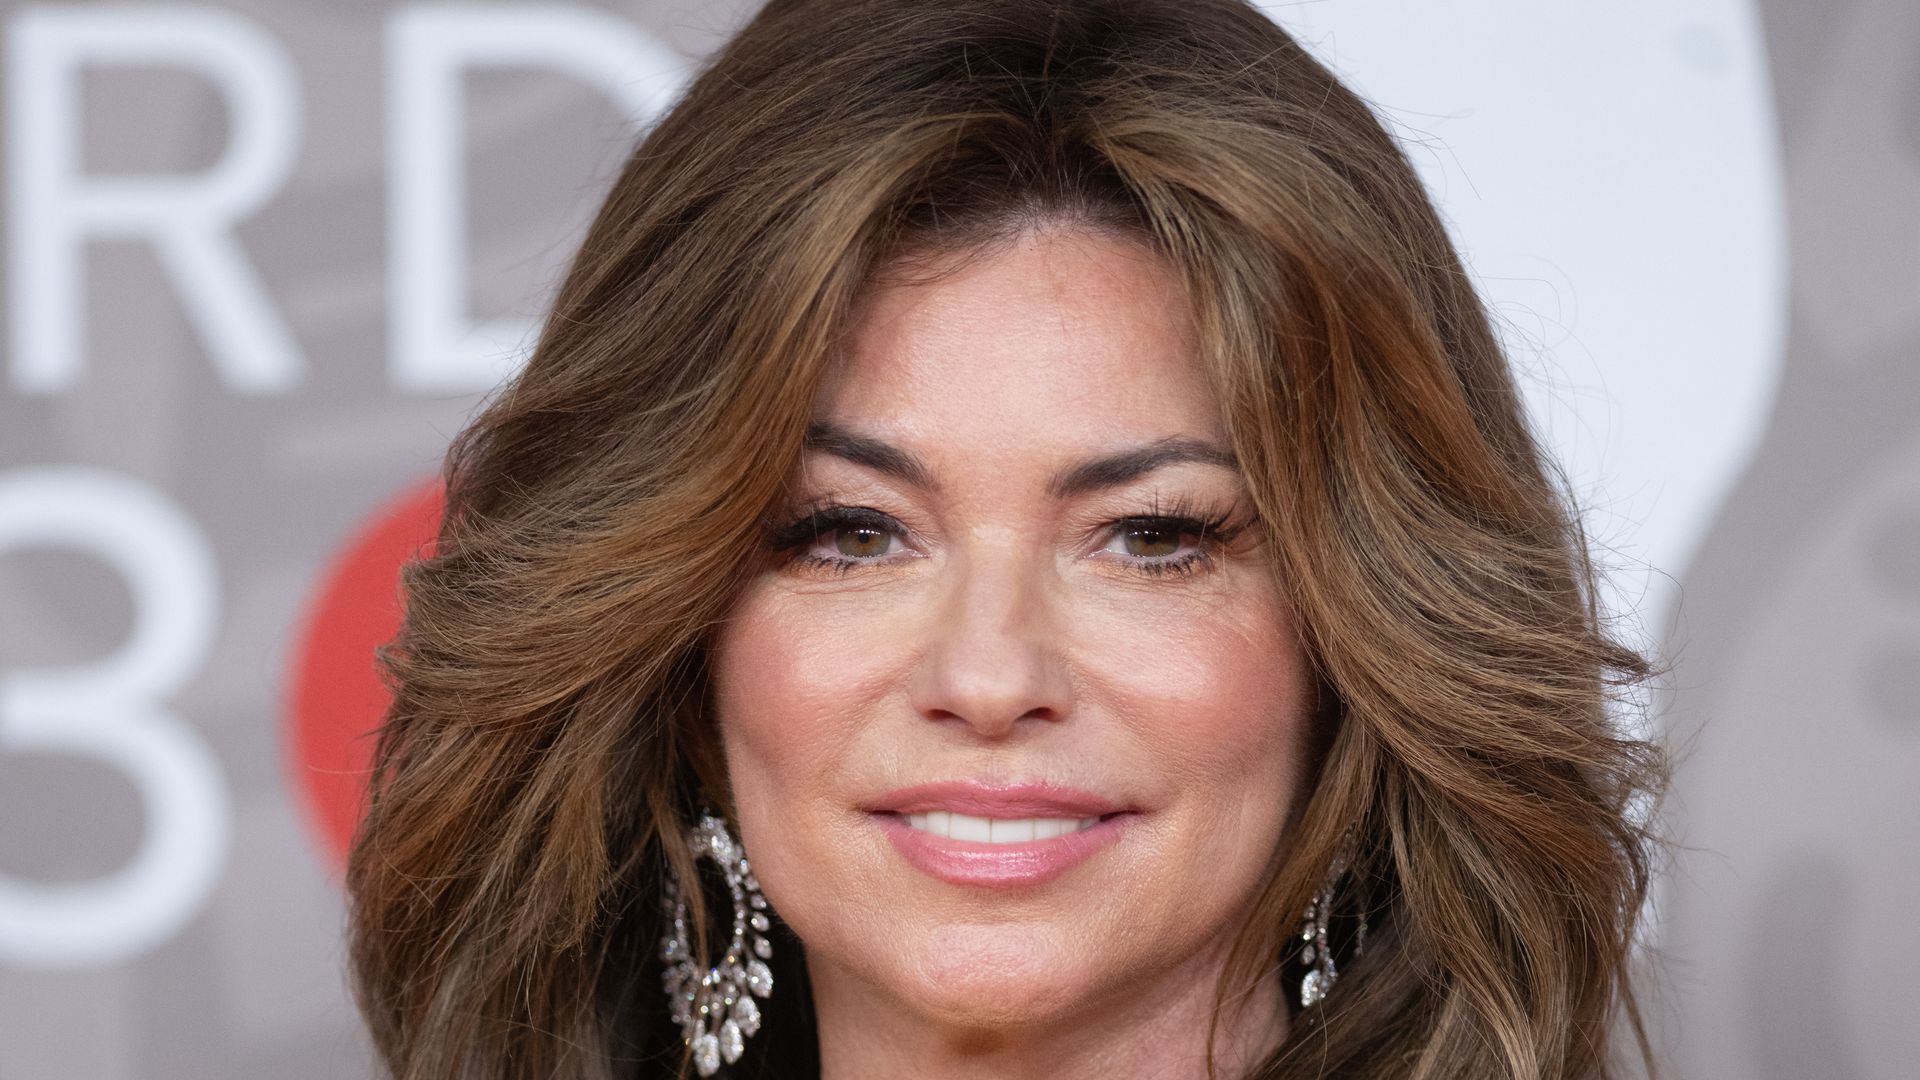 Shania Twain, 58, looks 'younger than ever' in daring strapless mini-dress